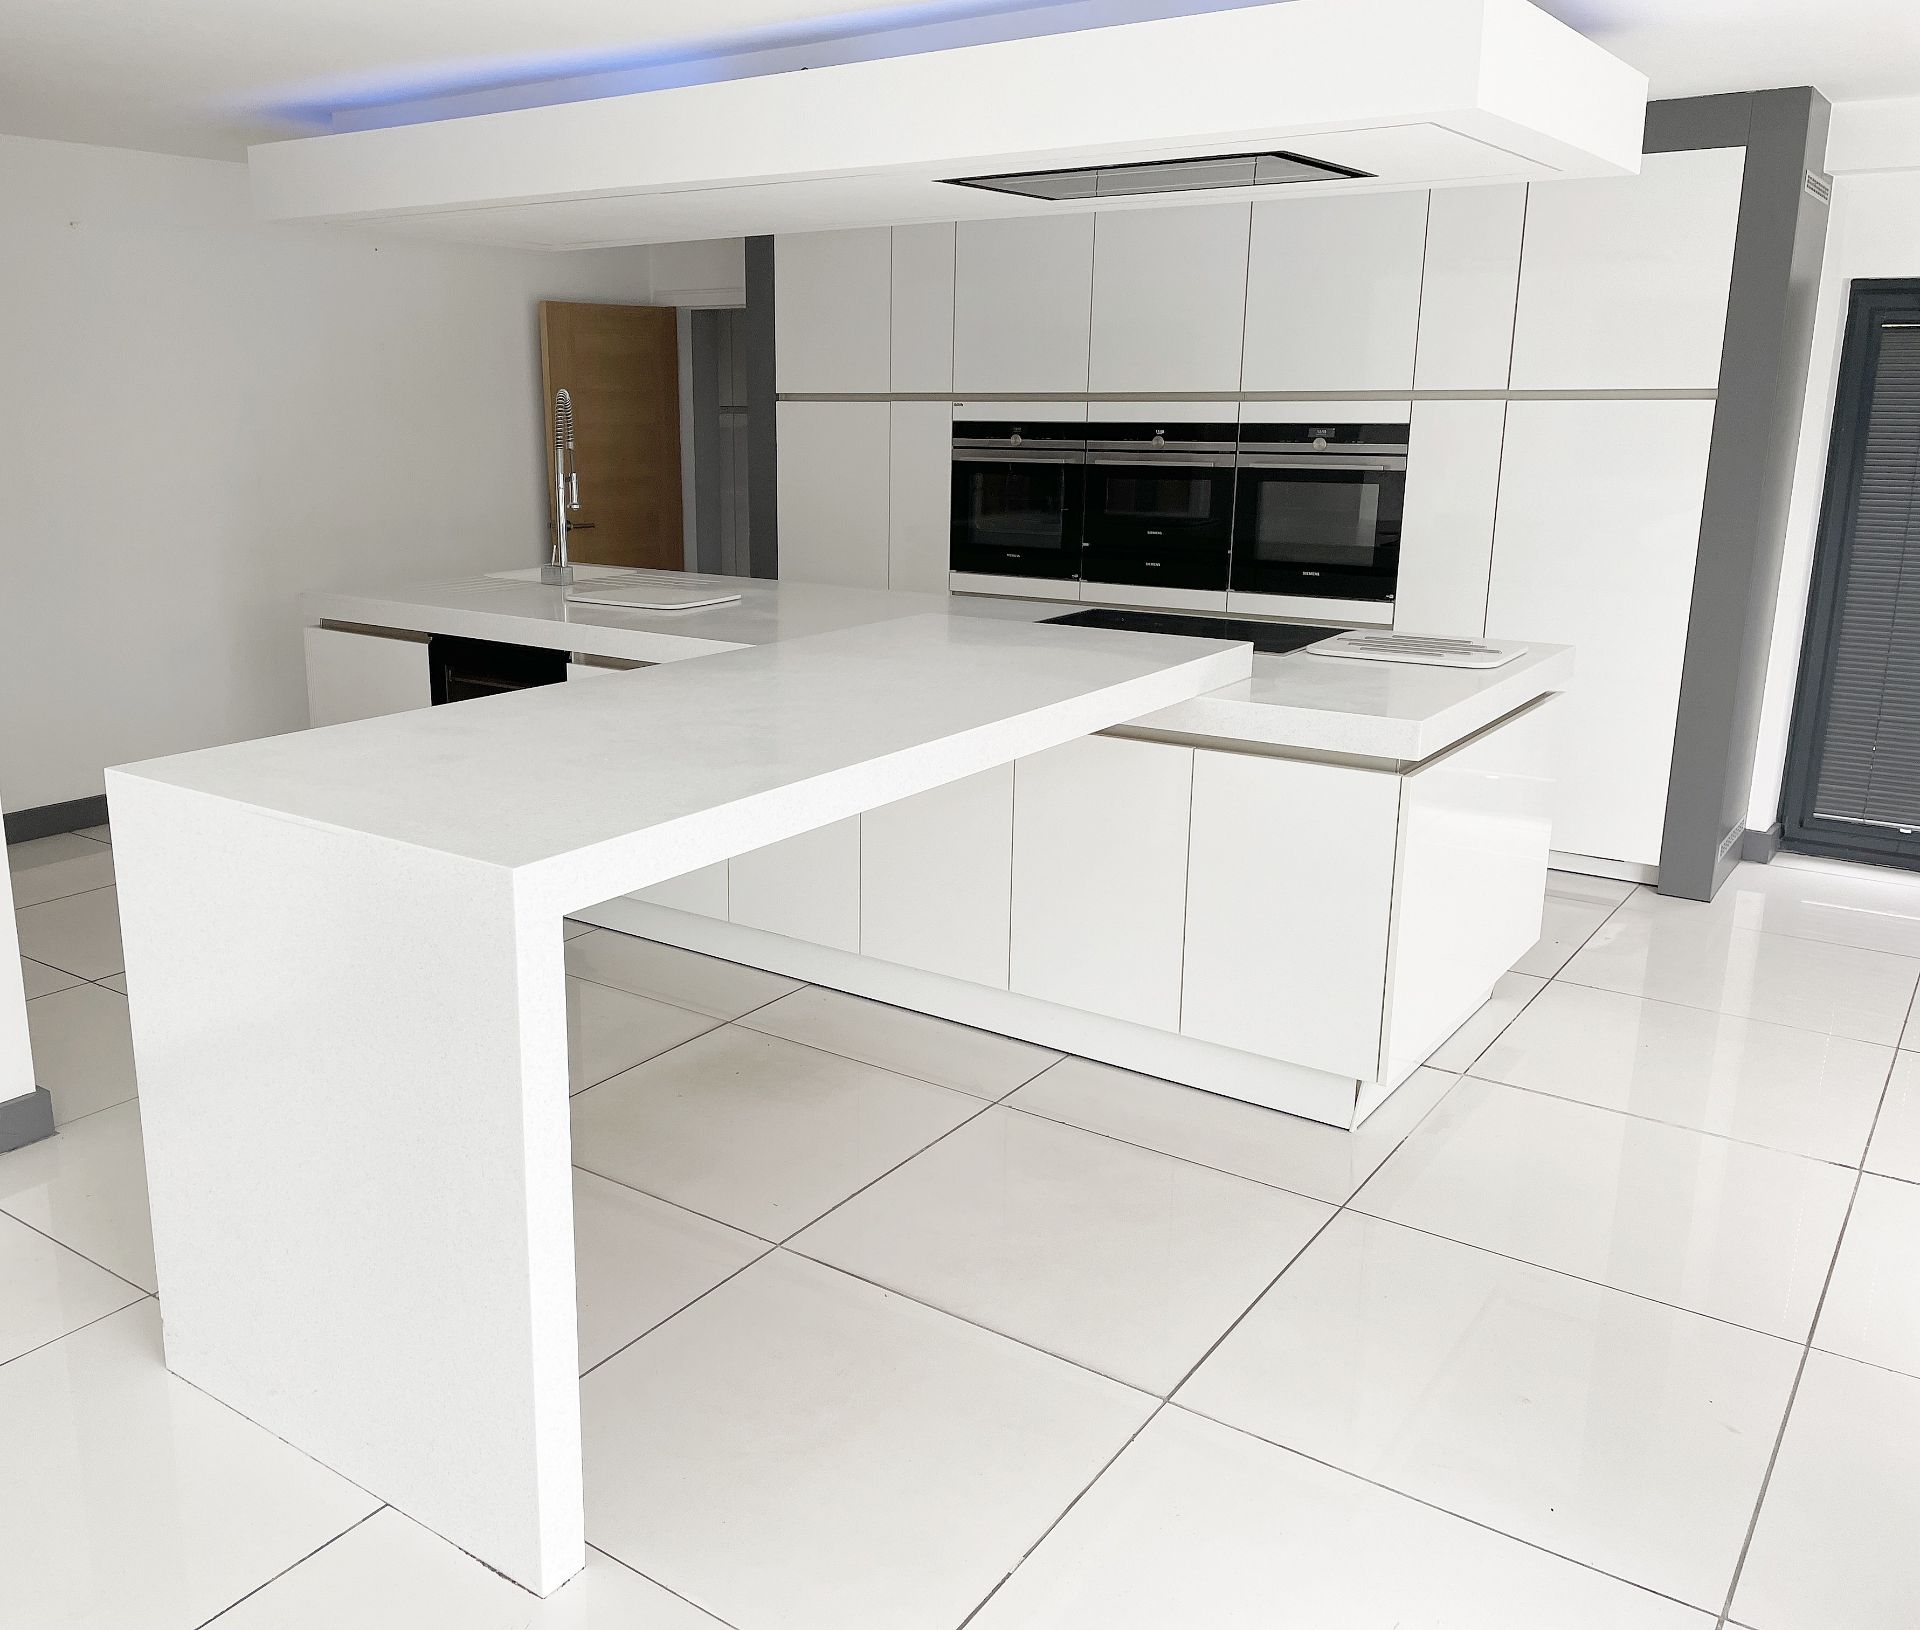 1 x SieMatic Contemporary Fitted Kitchen With Branded Appliances, Central Island + Corian Worktops - Image 14 of 100